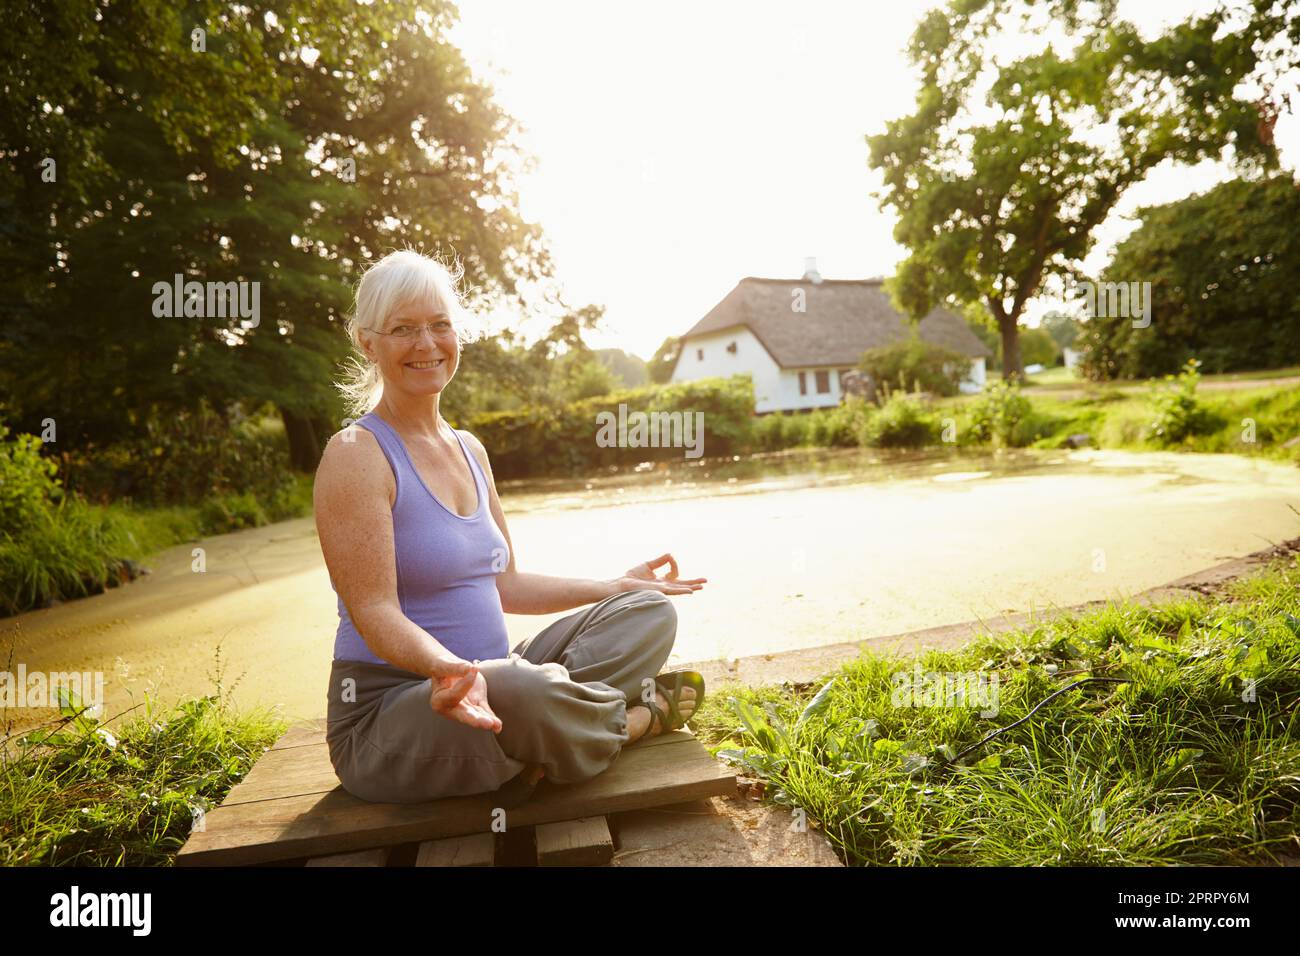 Bringing body, mind and spirit in harmony. Portrait of an attractive mature woman sitting in the lotus position in a garden setting. Stock Photo